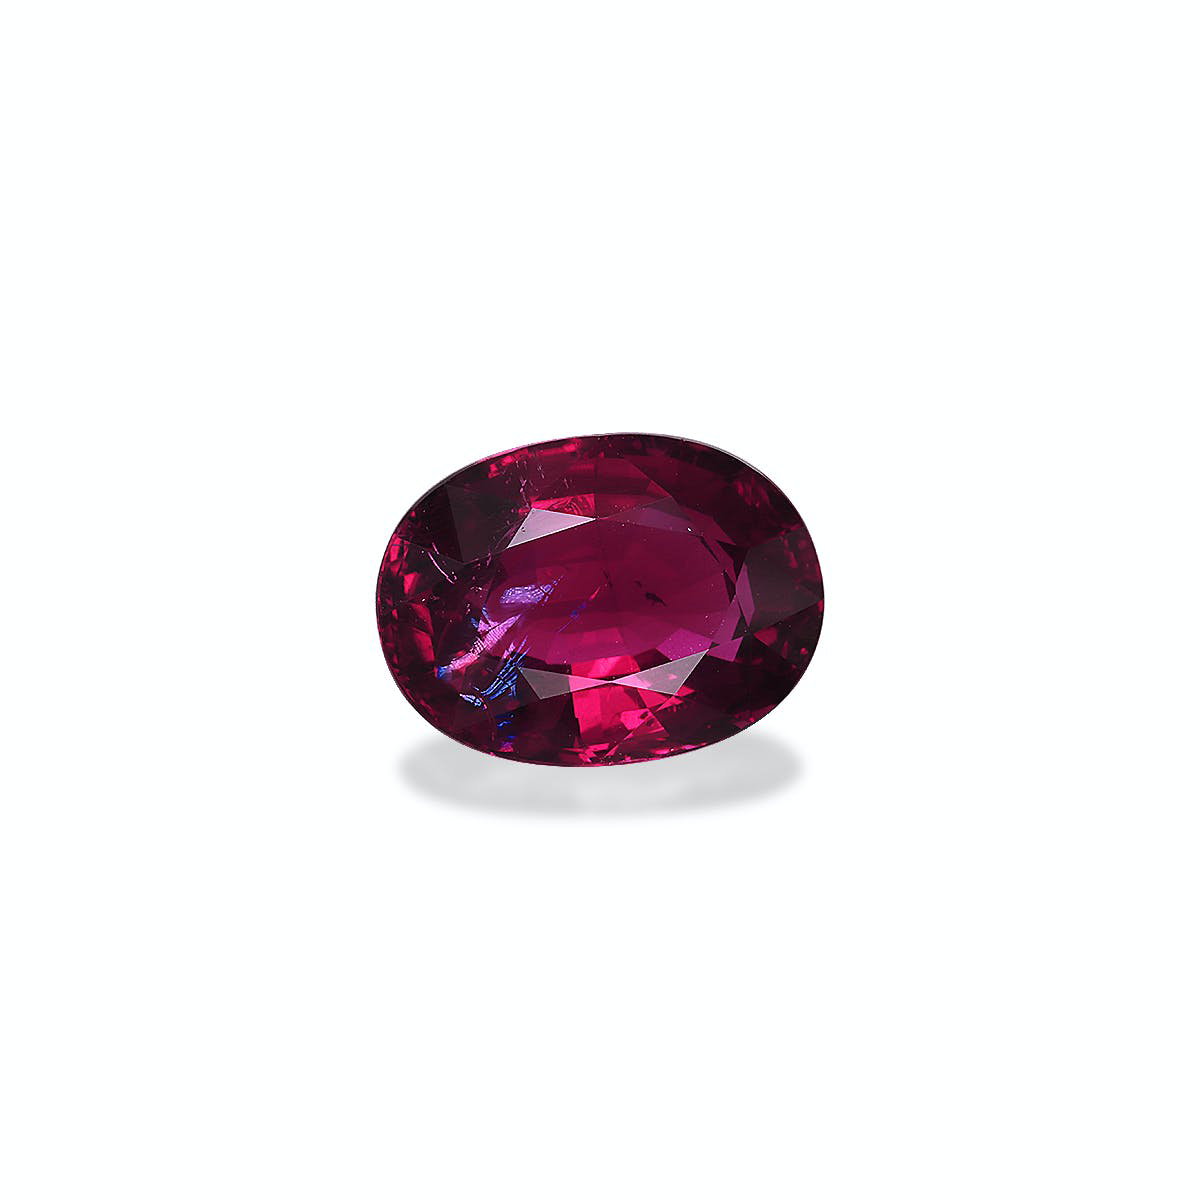 Picture of Rose Red Rubellite Tourmaline 7.23ct (RL0013)